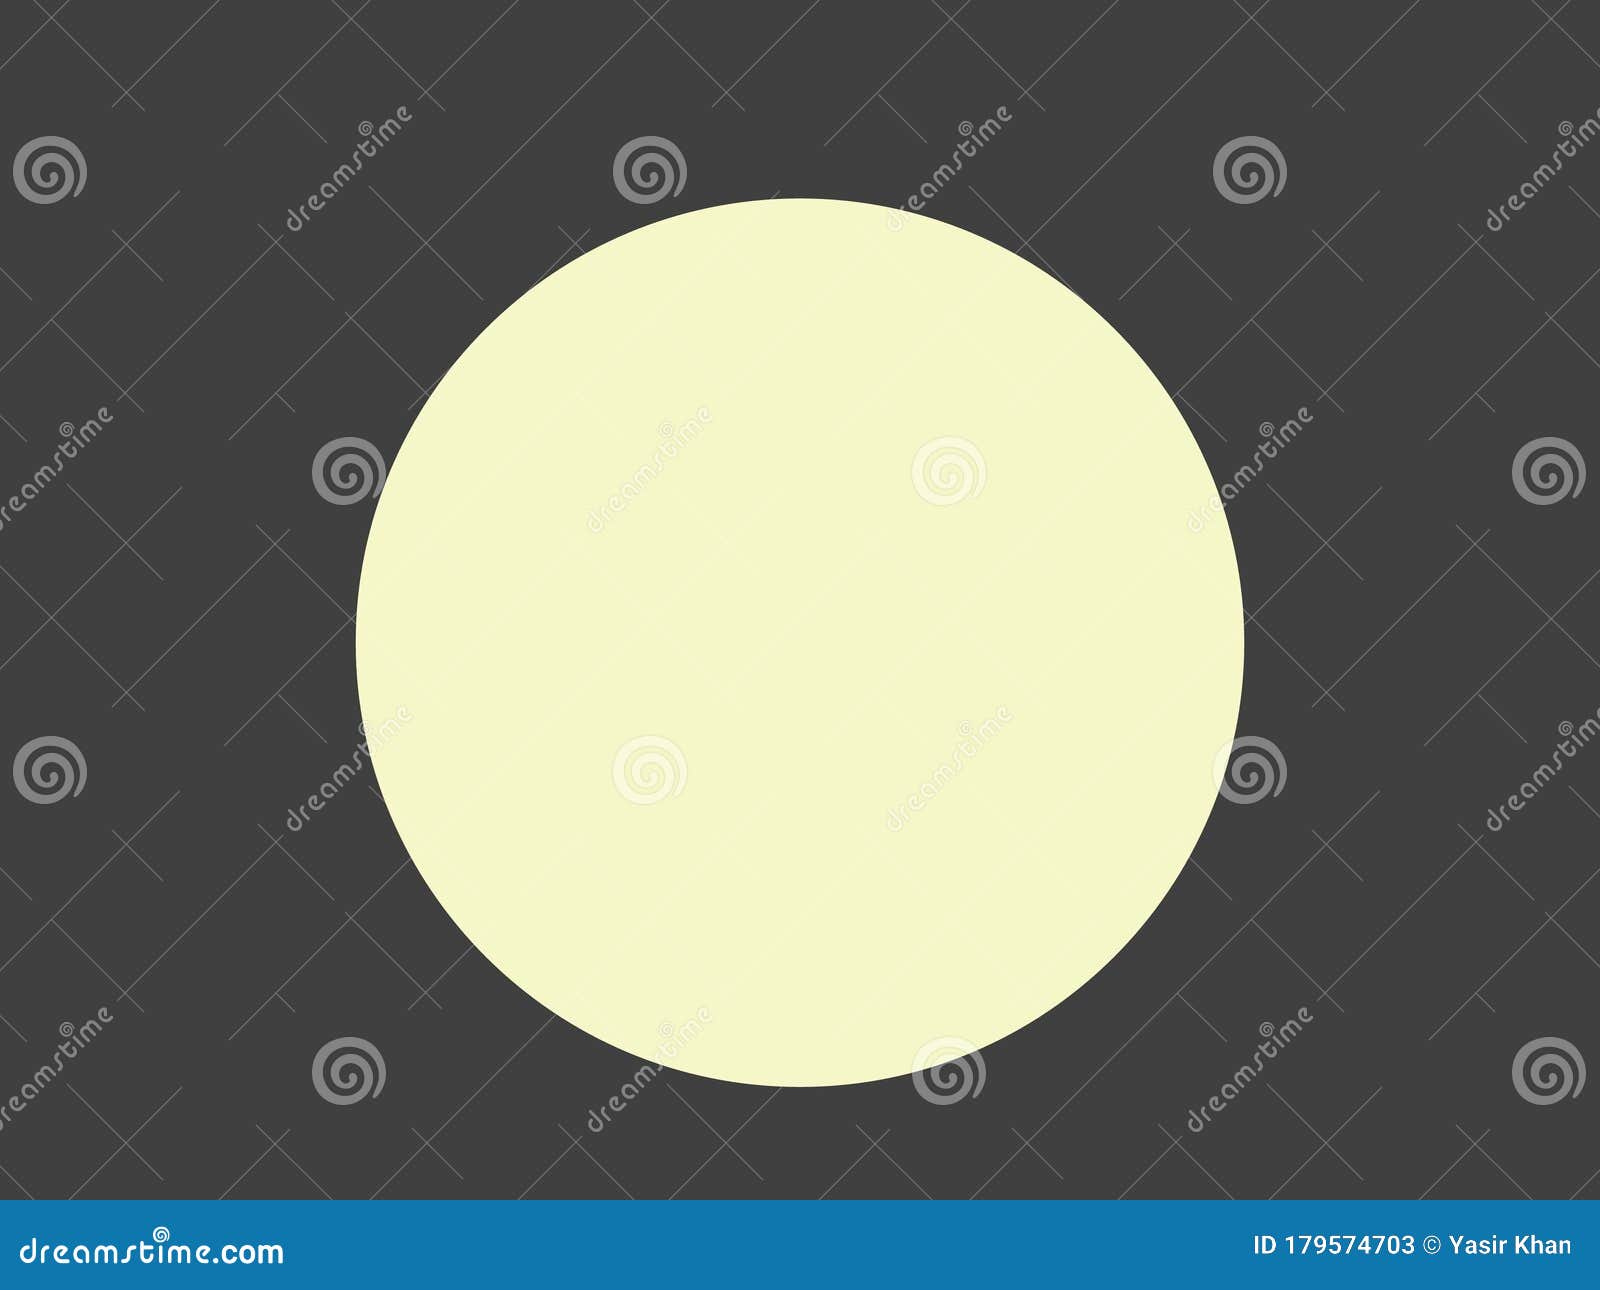 On the Dark Grey Color Background Wall the Cream Color Circle in the Center  Abstract Art and Blank Page for Use Stock Image - Image of color, background:  179574703